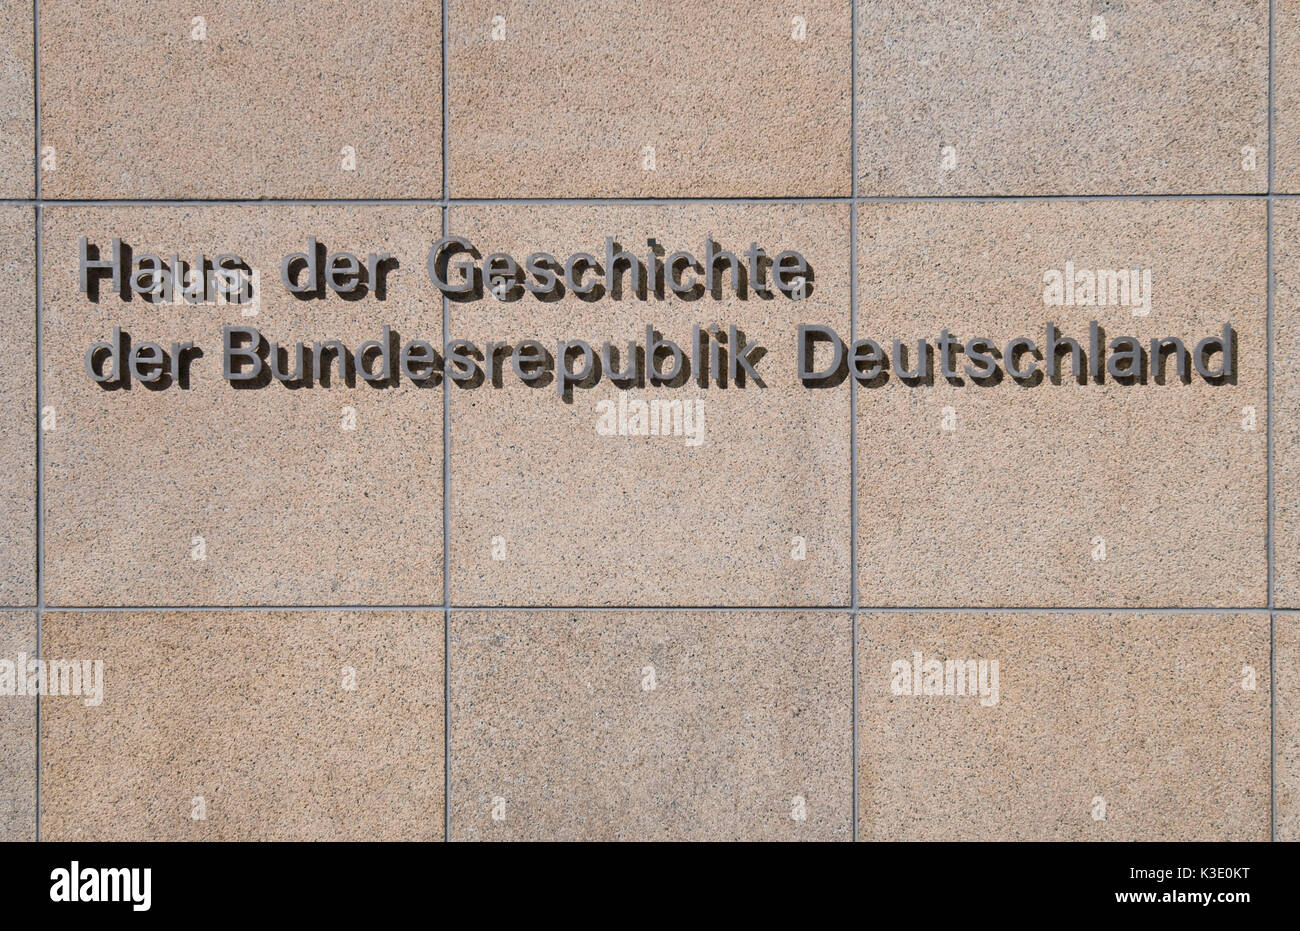 Europe, Germany, North Rhine-Westphalia, Bonn, house of the story of the Federal Republic of Germany, Stock Photo